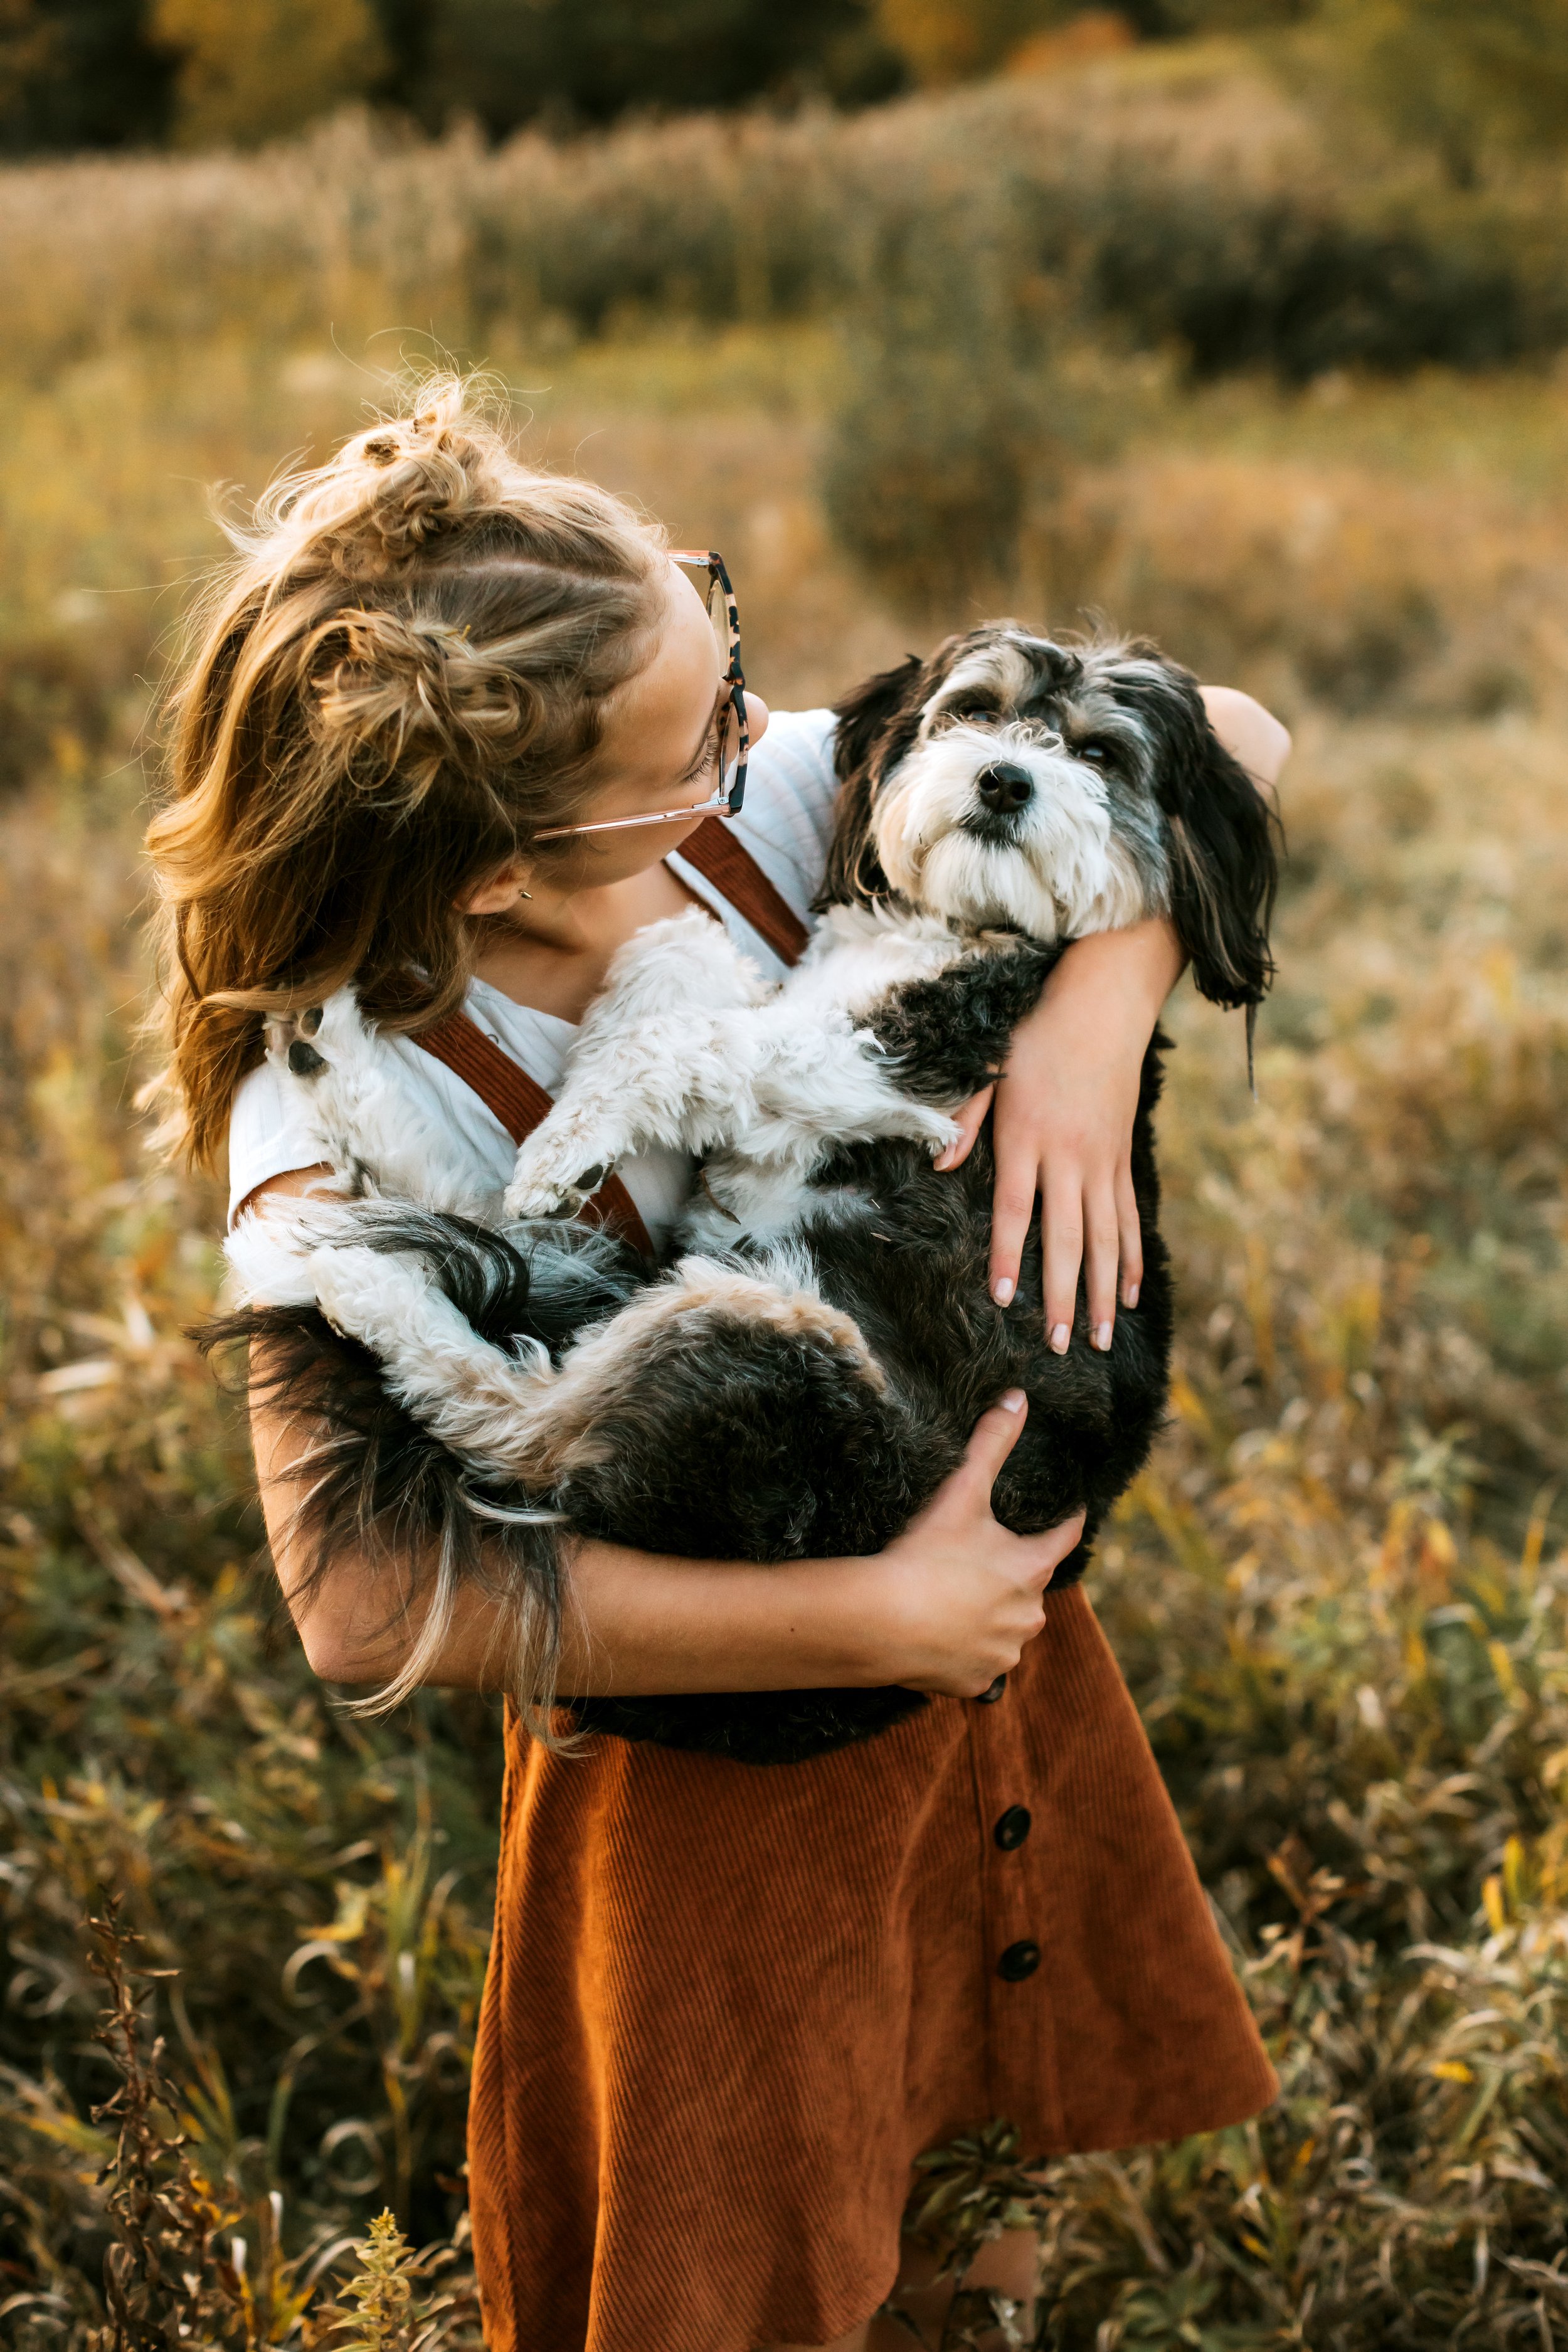  Portrait of the fur sibling being held by a girl by Teala Ward Photography in the Illinois Valley. girl and dog #TealaWardPhotography #TealaWardFamilies #IllinoisValleyfamilypics #fursibiling #Illinoisfamilyphotography #brother&amp;sister 